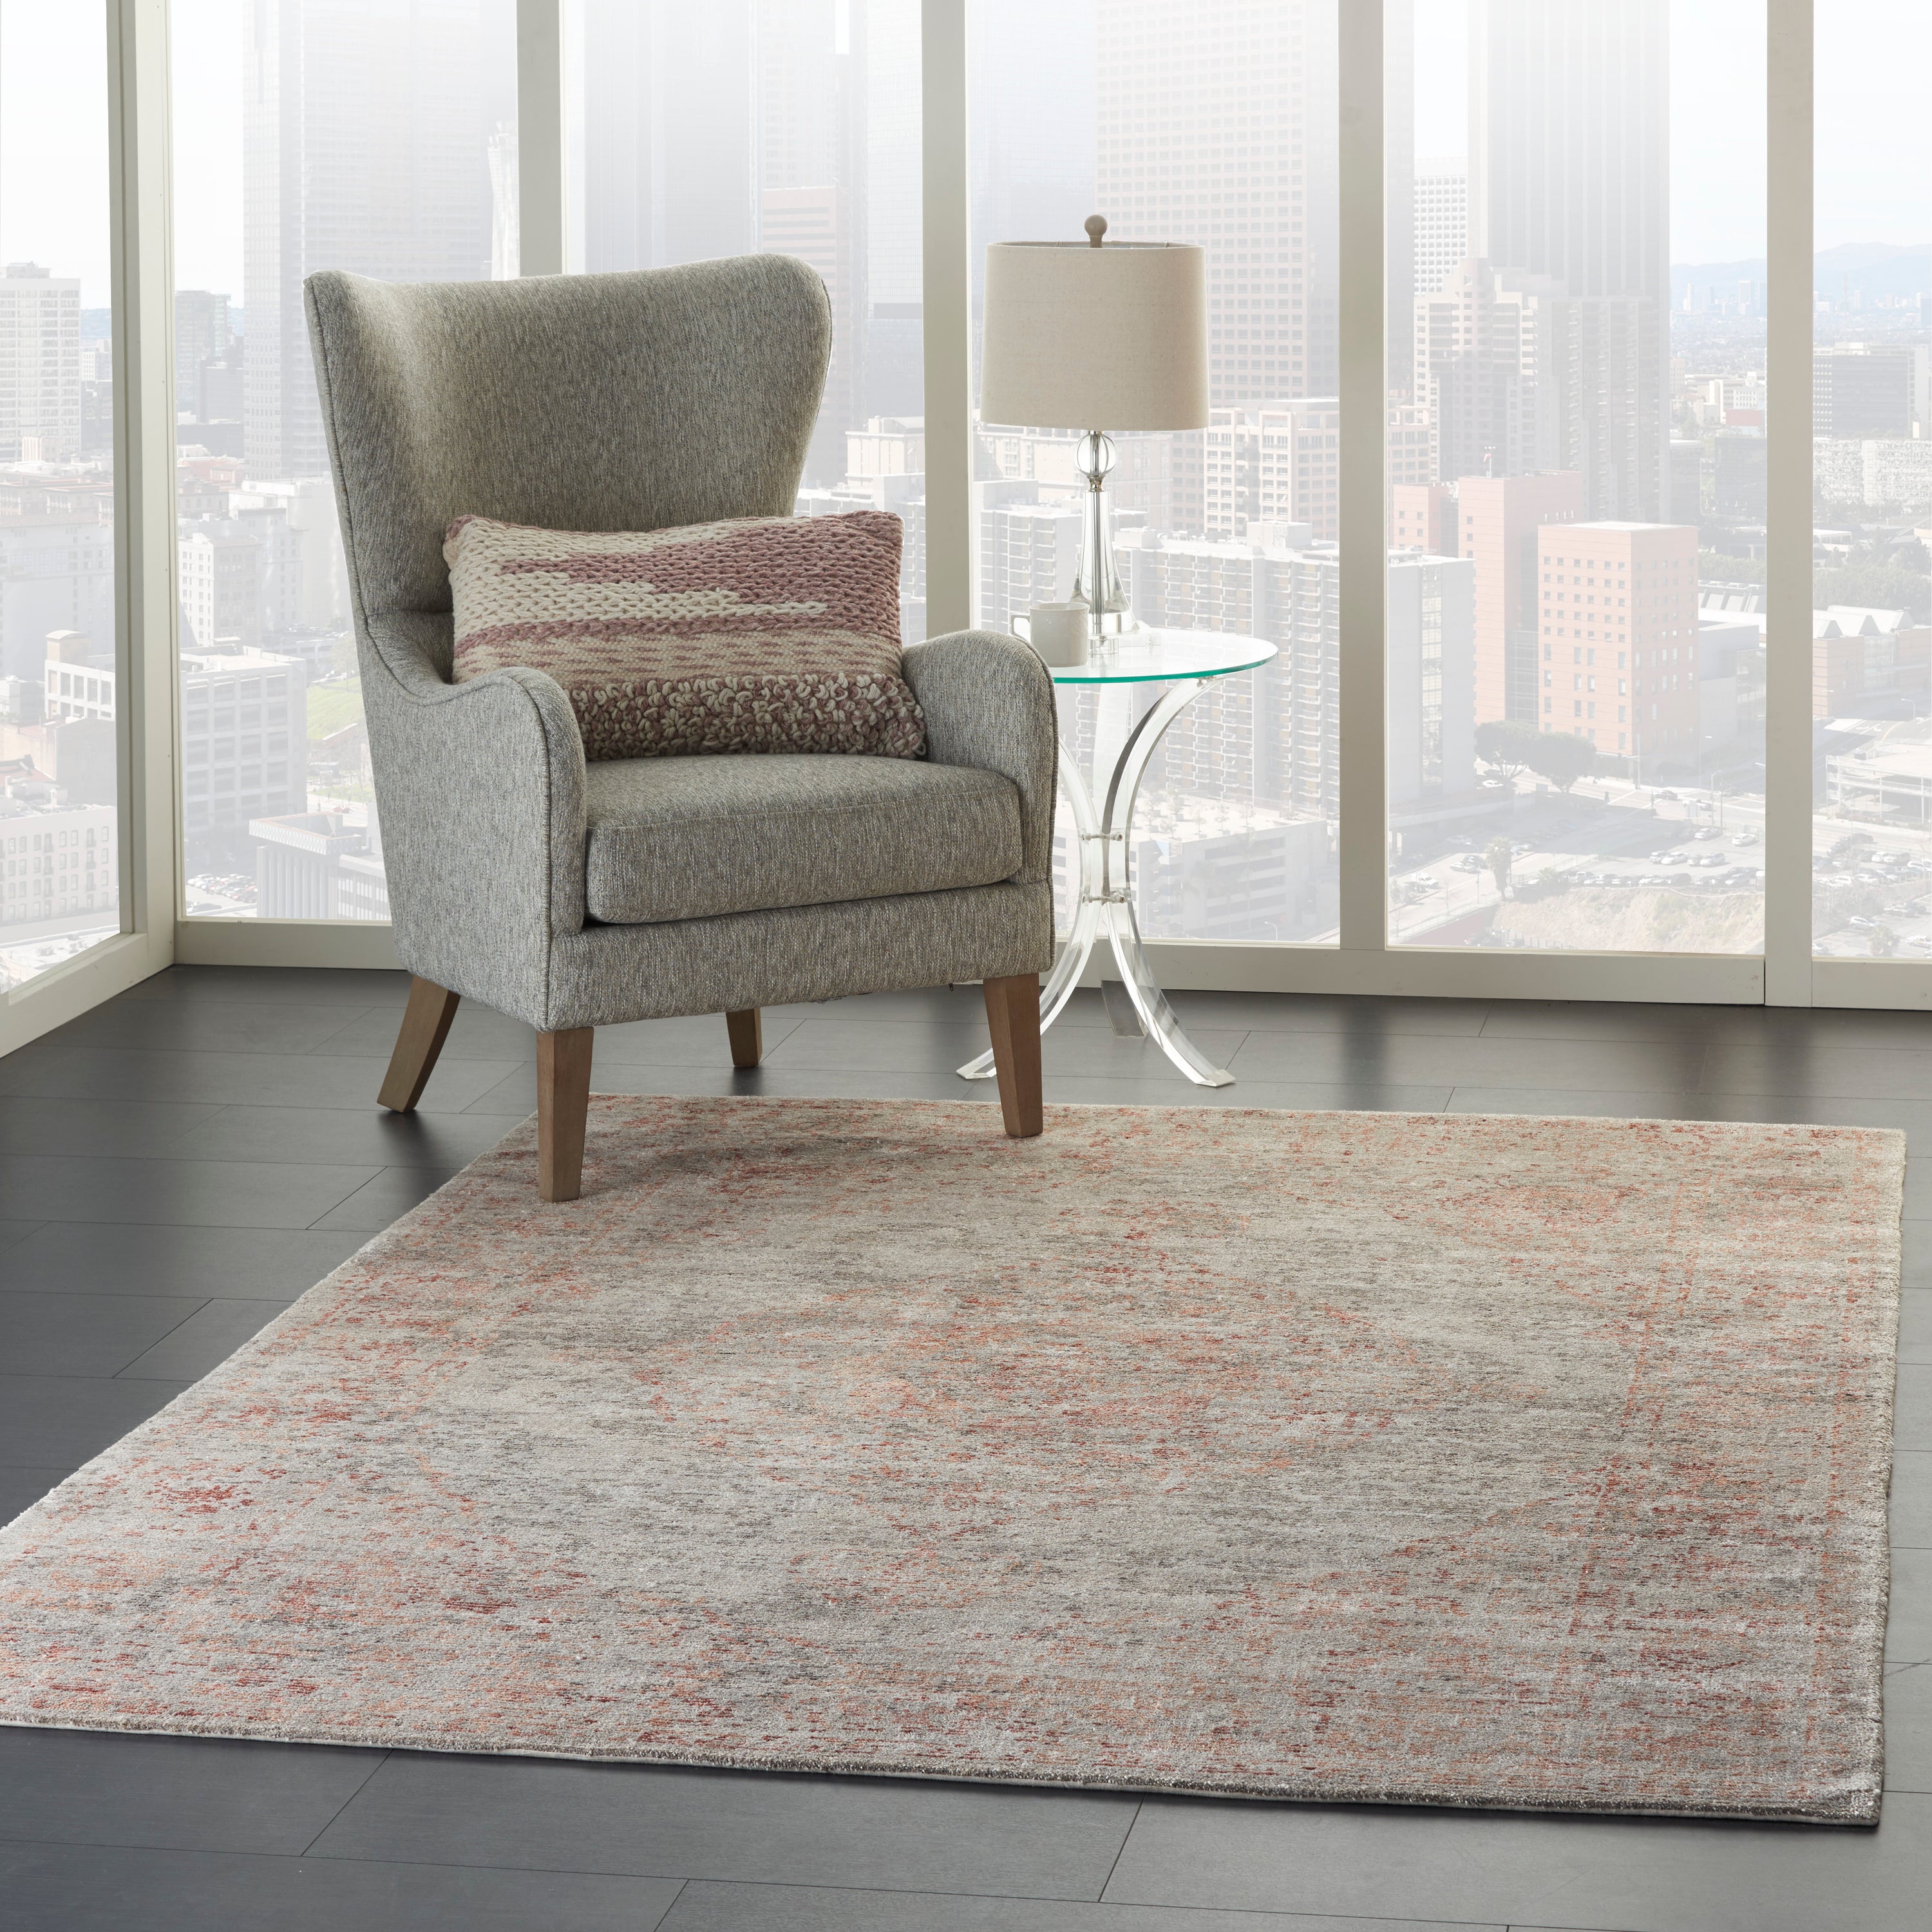 Urban elegance captured in a contemporary room with cityscape view.